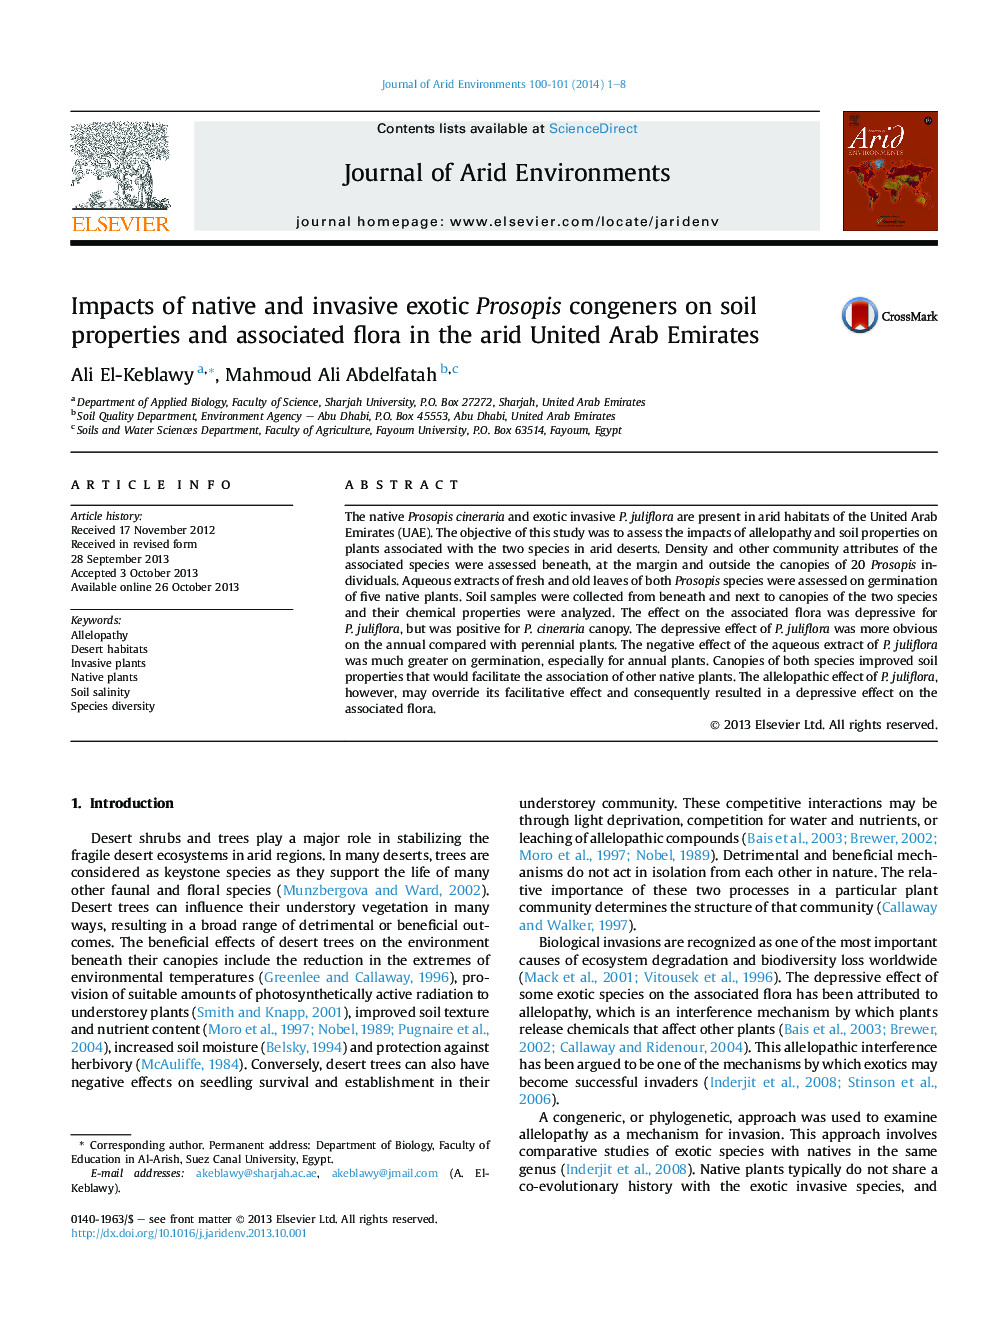 Impacts of native and invasive exotic Prosopis congeners on soil properties and associated flora in the arid United Arab Emirates